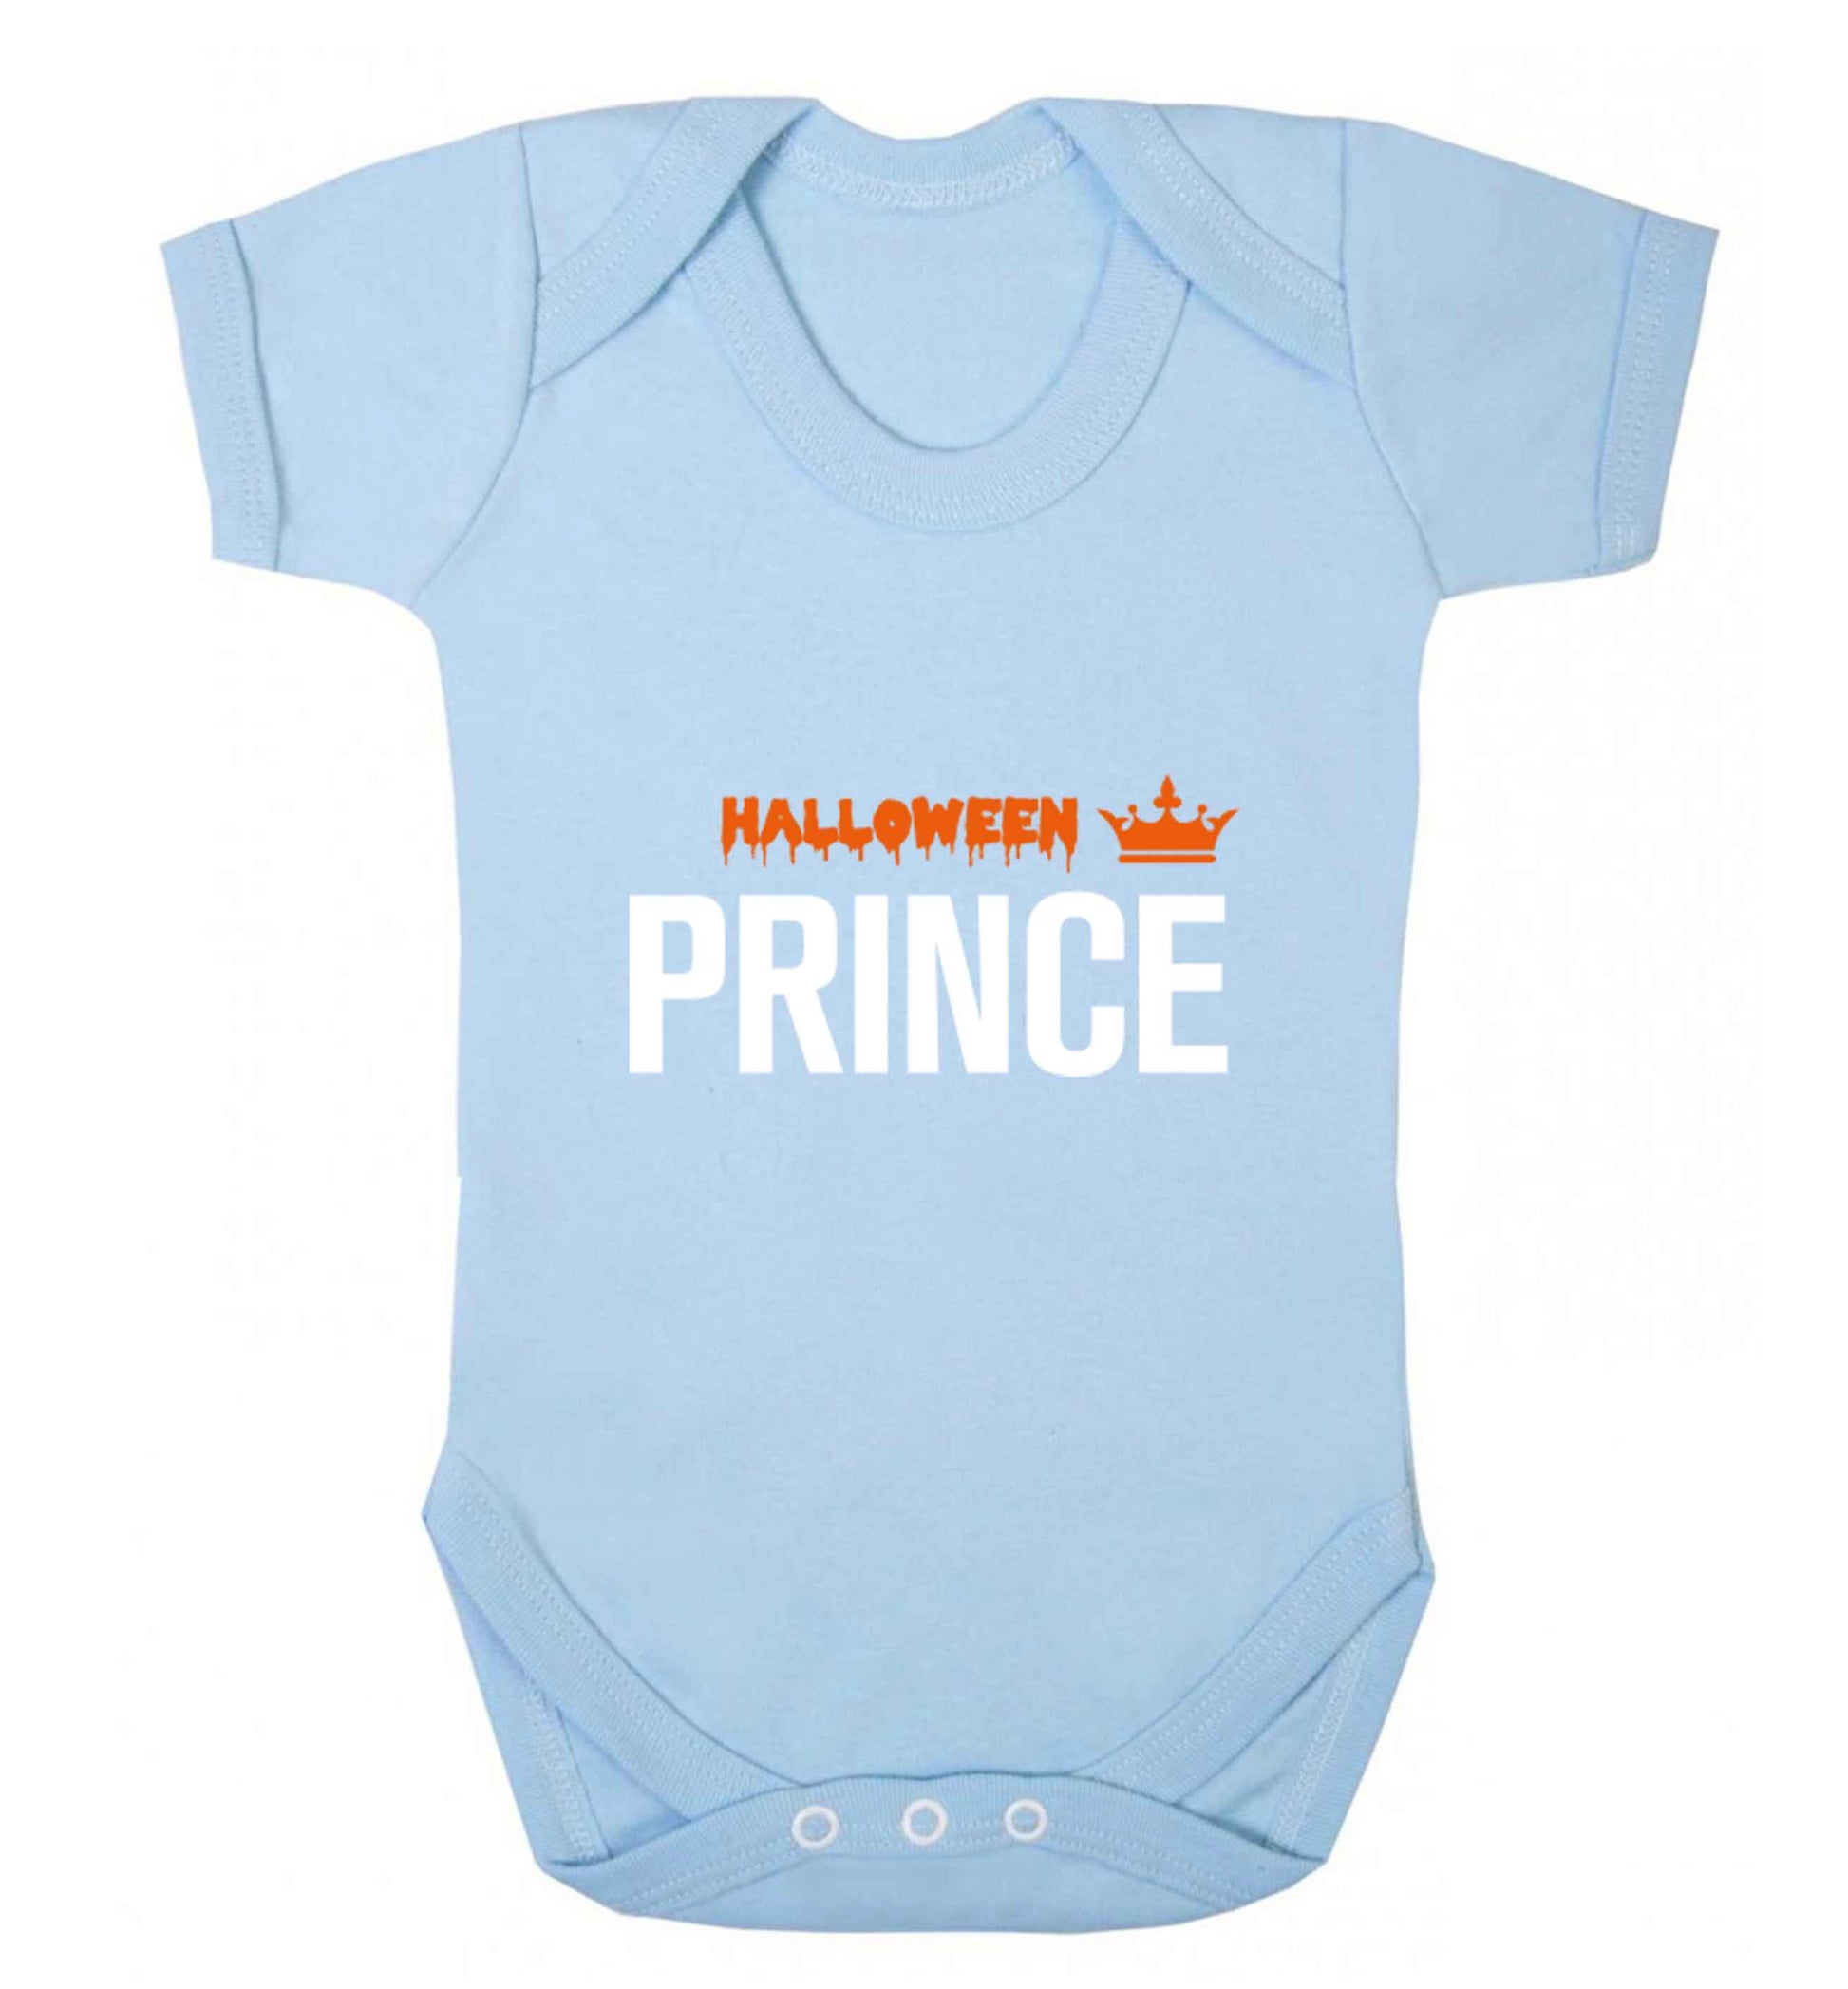 Halloween prince baby vest pale blue 18-24 months